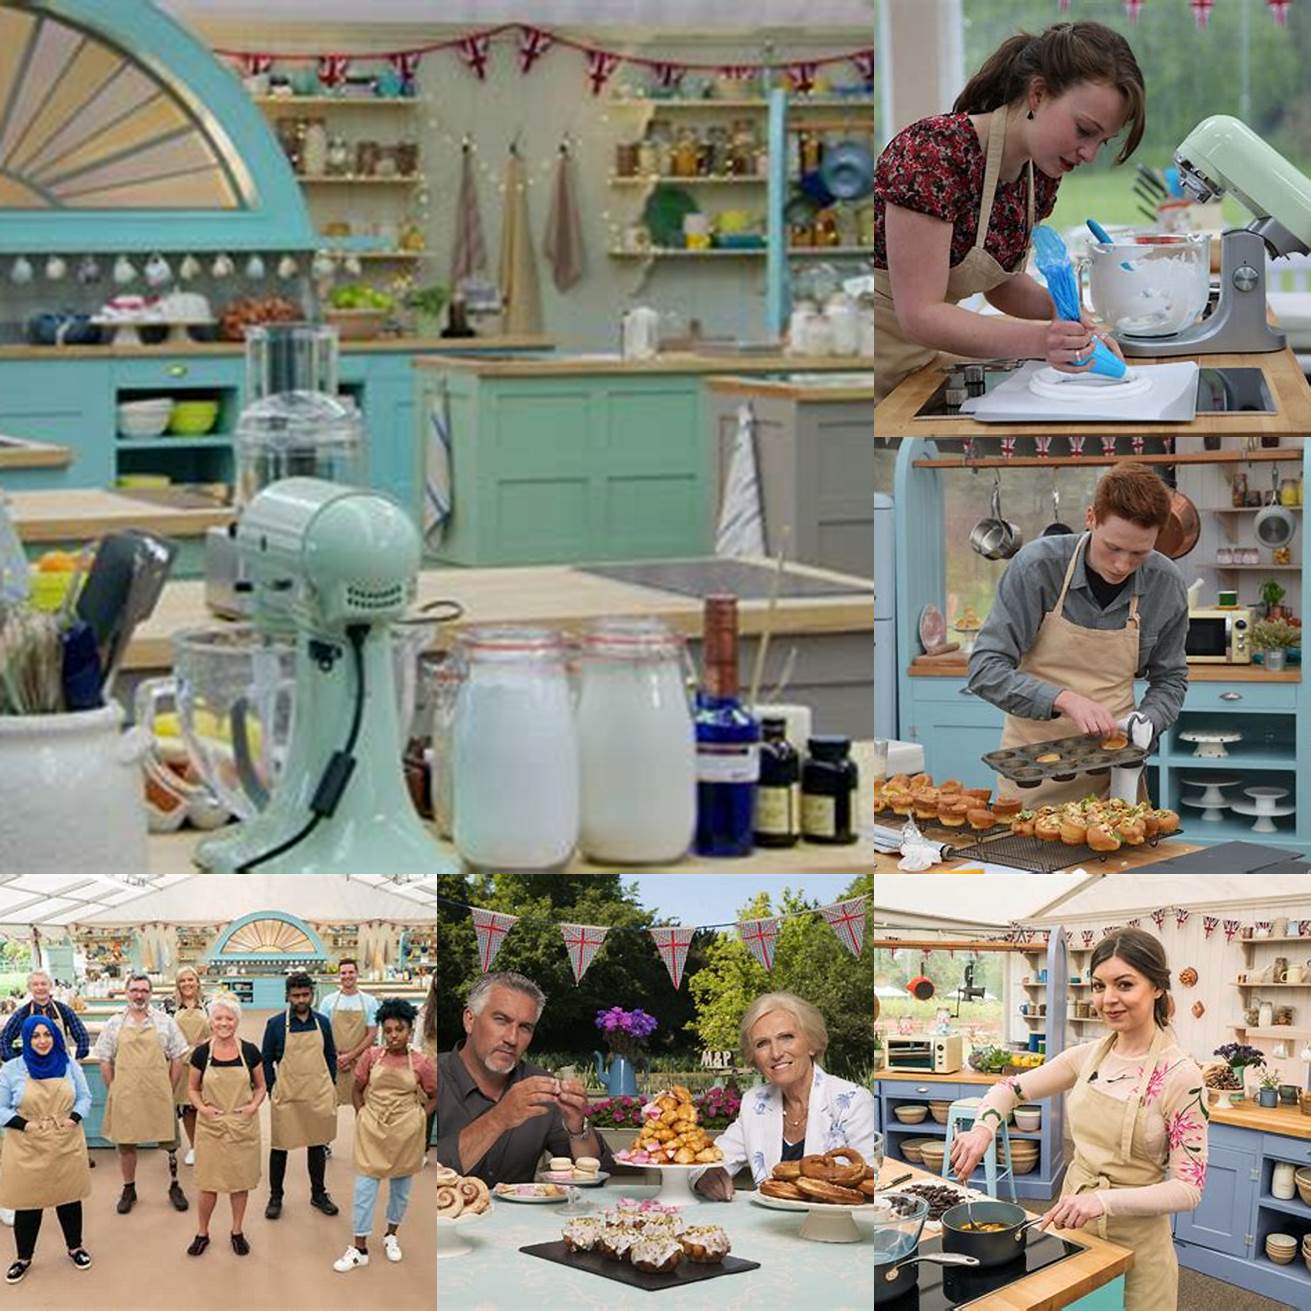 The kitchen in The Great British Baking Show